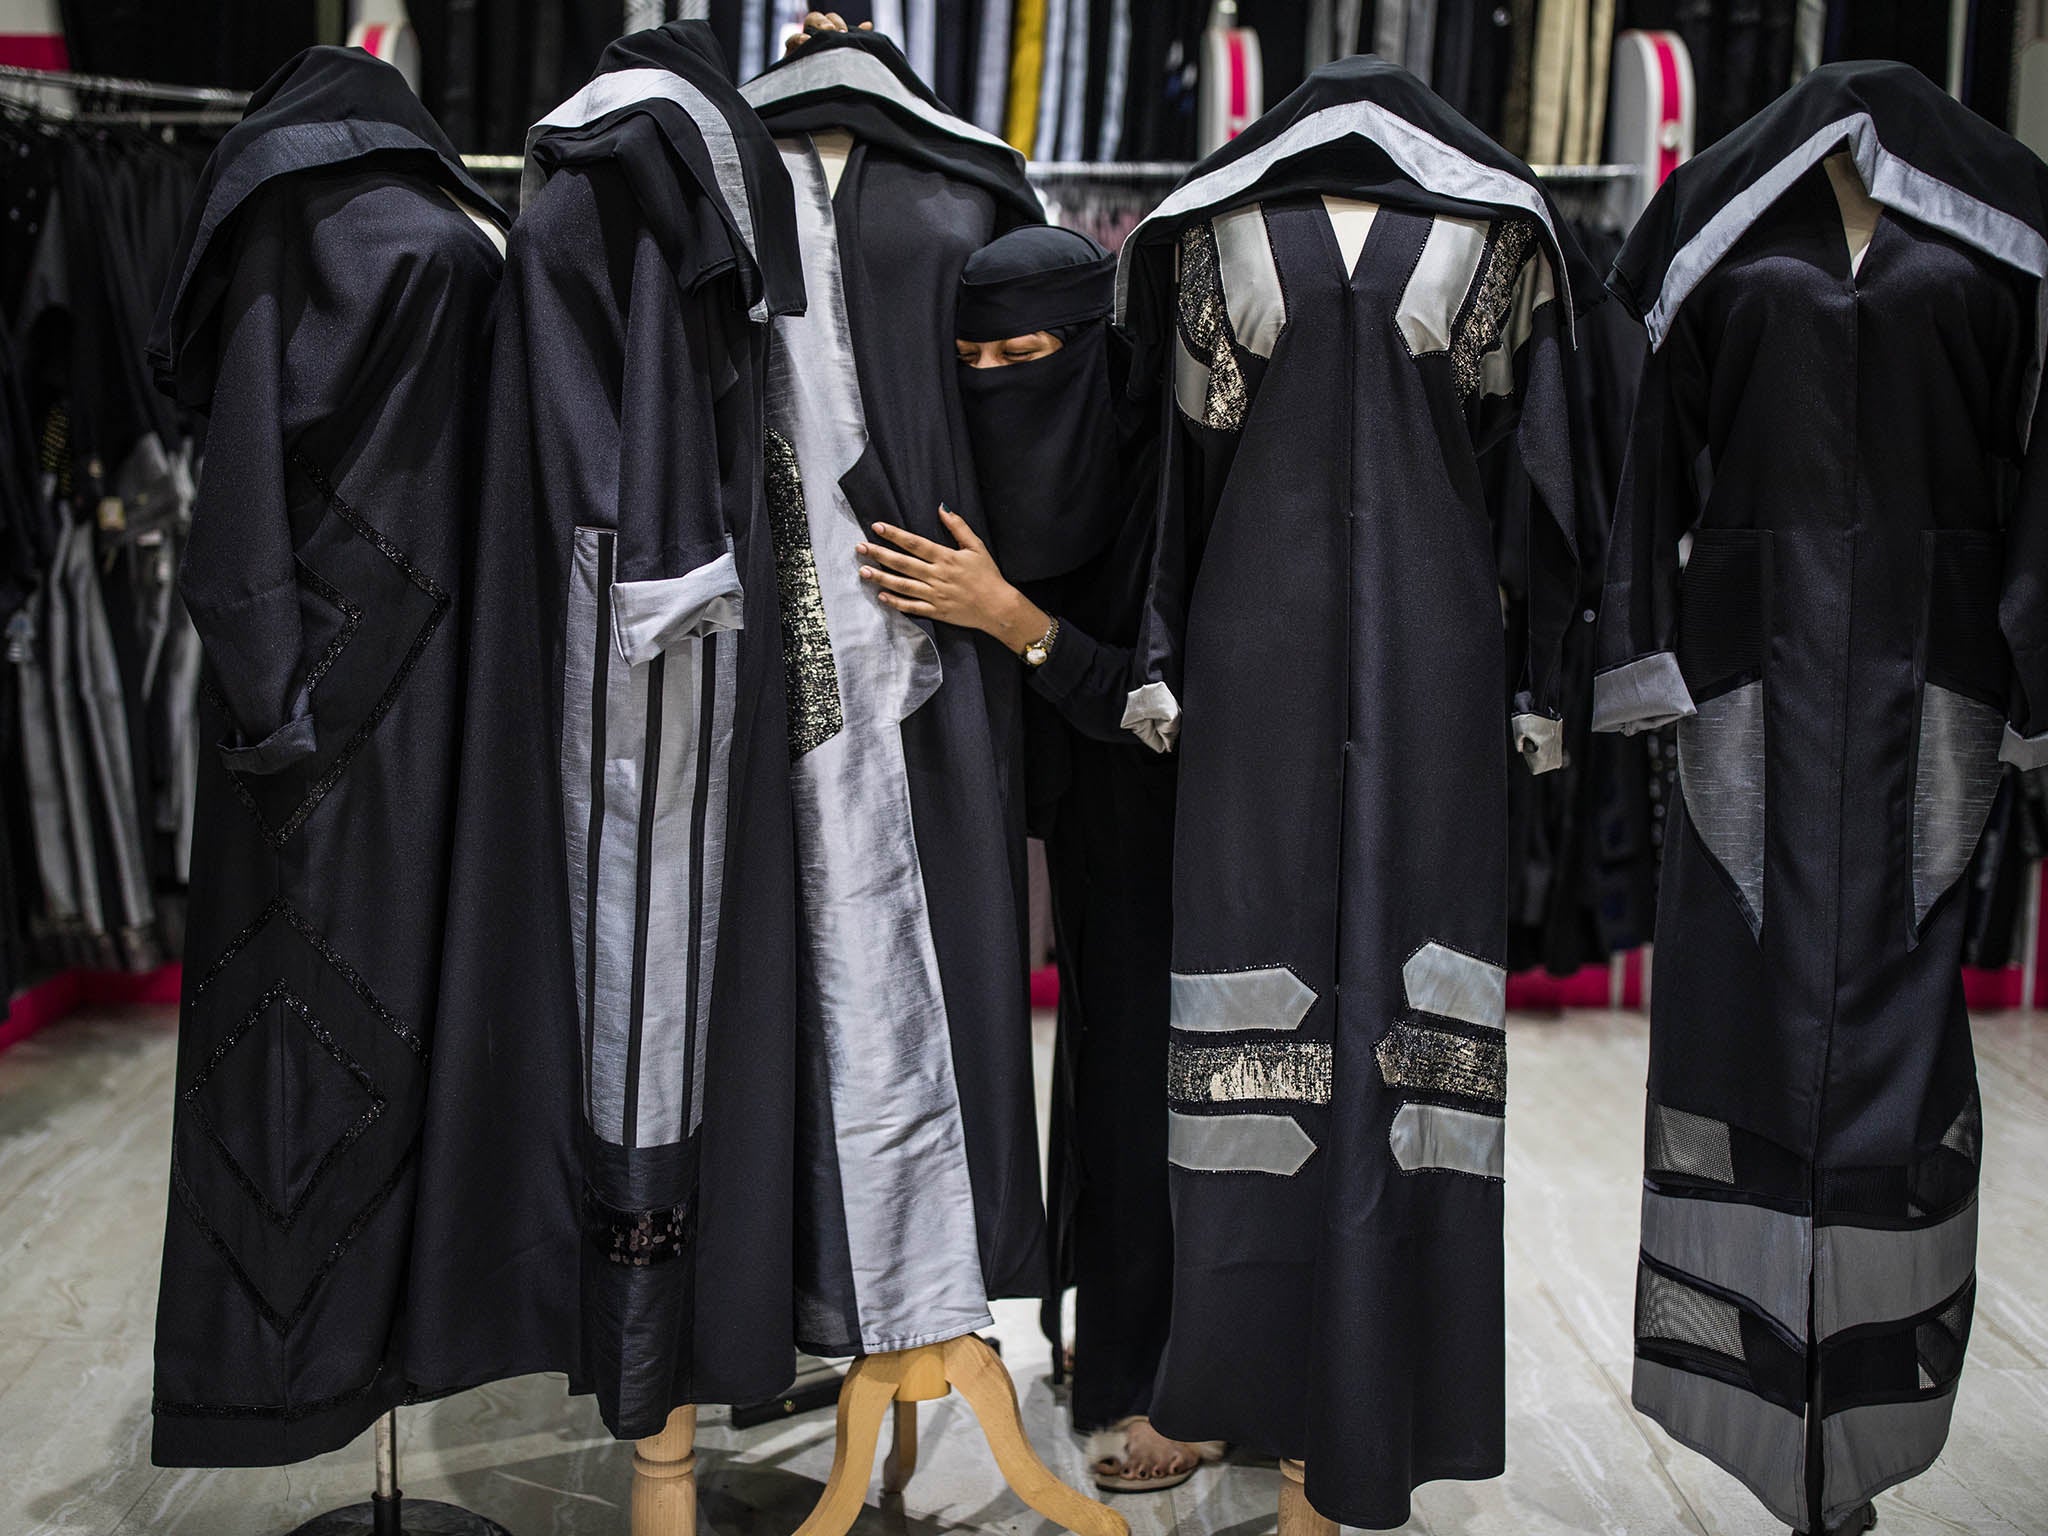 An employee at a shop in Riyadh, with the latest fashion in abayas that expresses a daring willingness to go beyond the existing constraints, but not so far as to stand out